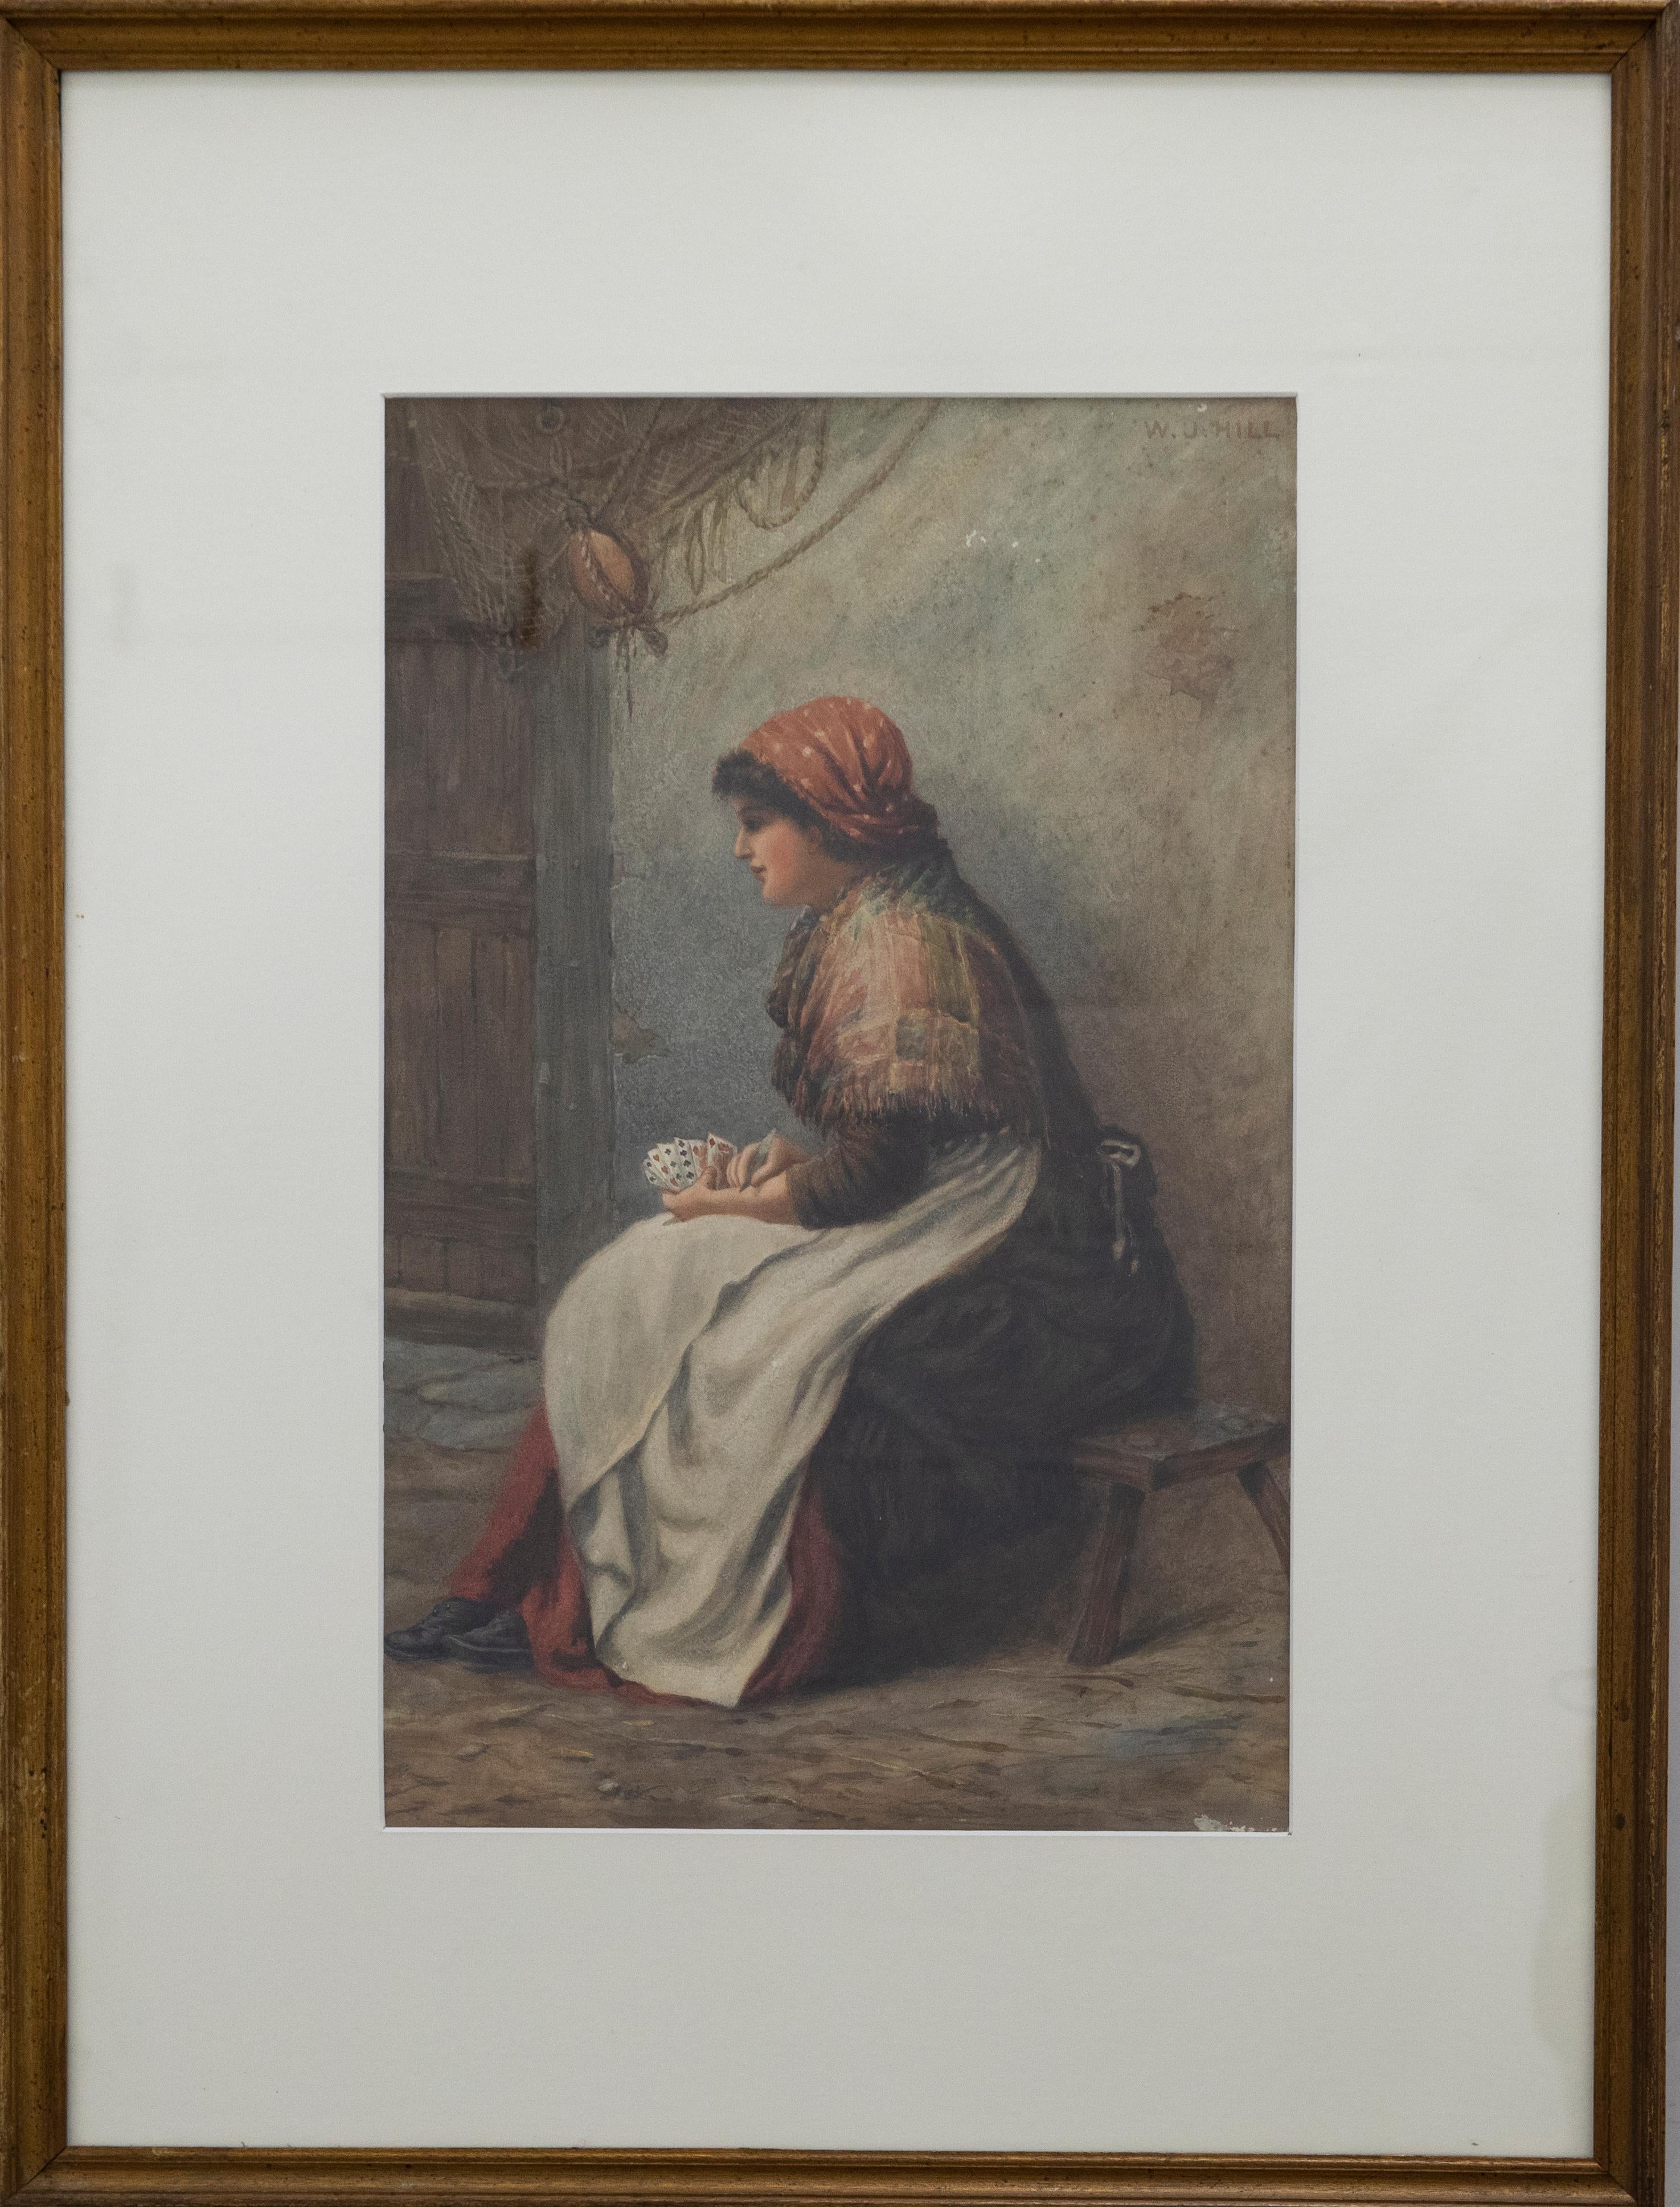 A charming 19th Century watercolour depicting a Fisherman's wife wrapped in a tartan shawl holding a hand of cards. The artist captures the woman in profile, sporting a dotted head scarf and sitting of a wooden bench. Behind her fishing nets hang